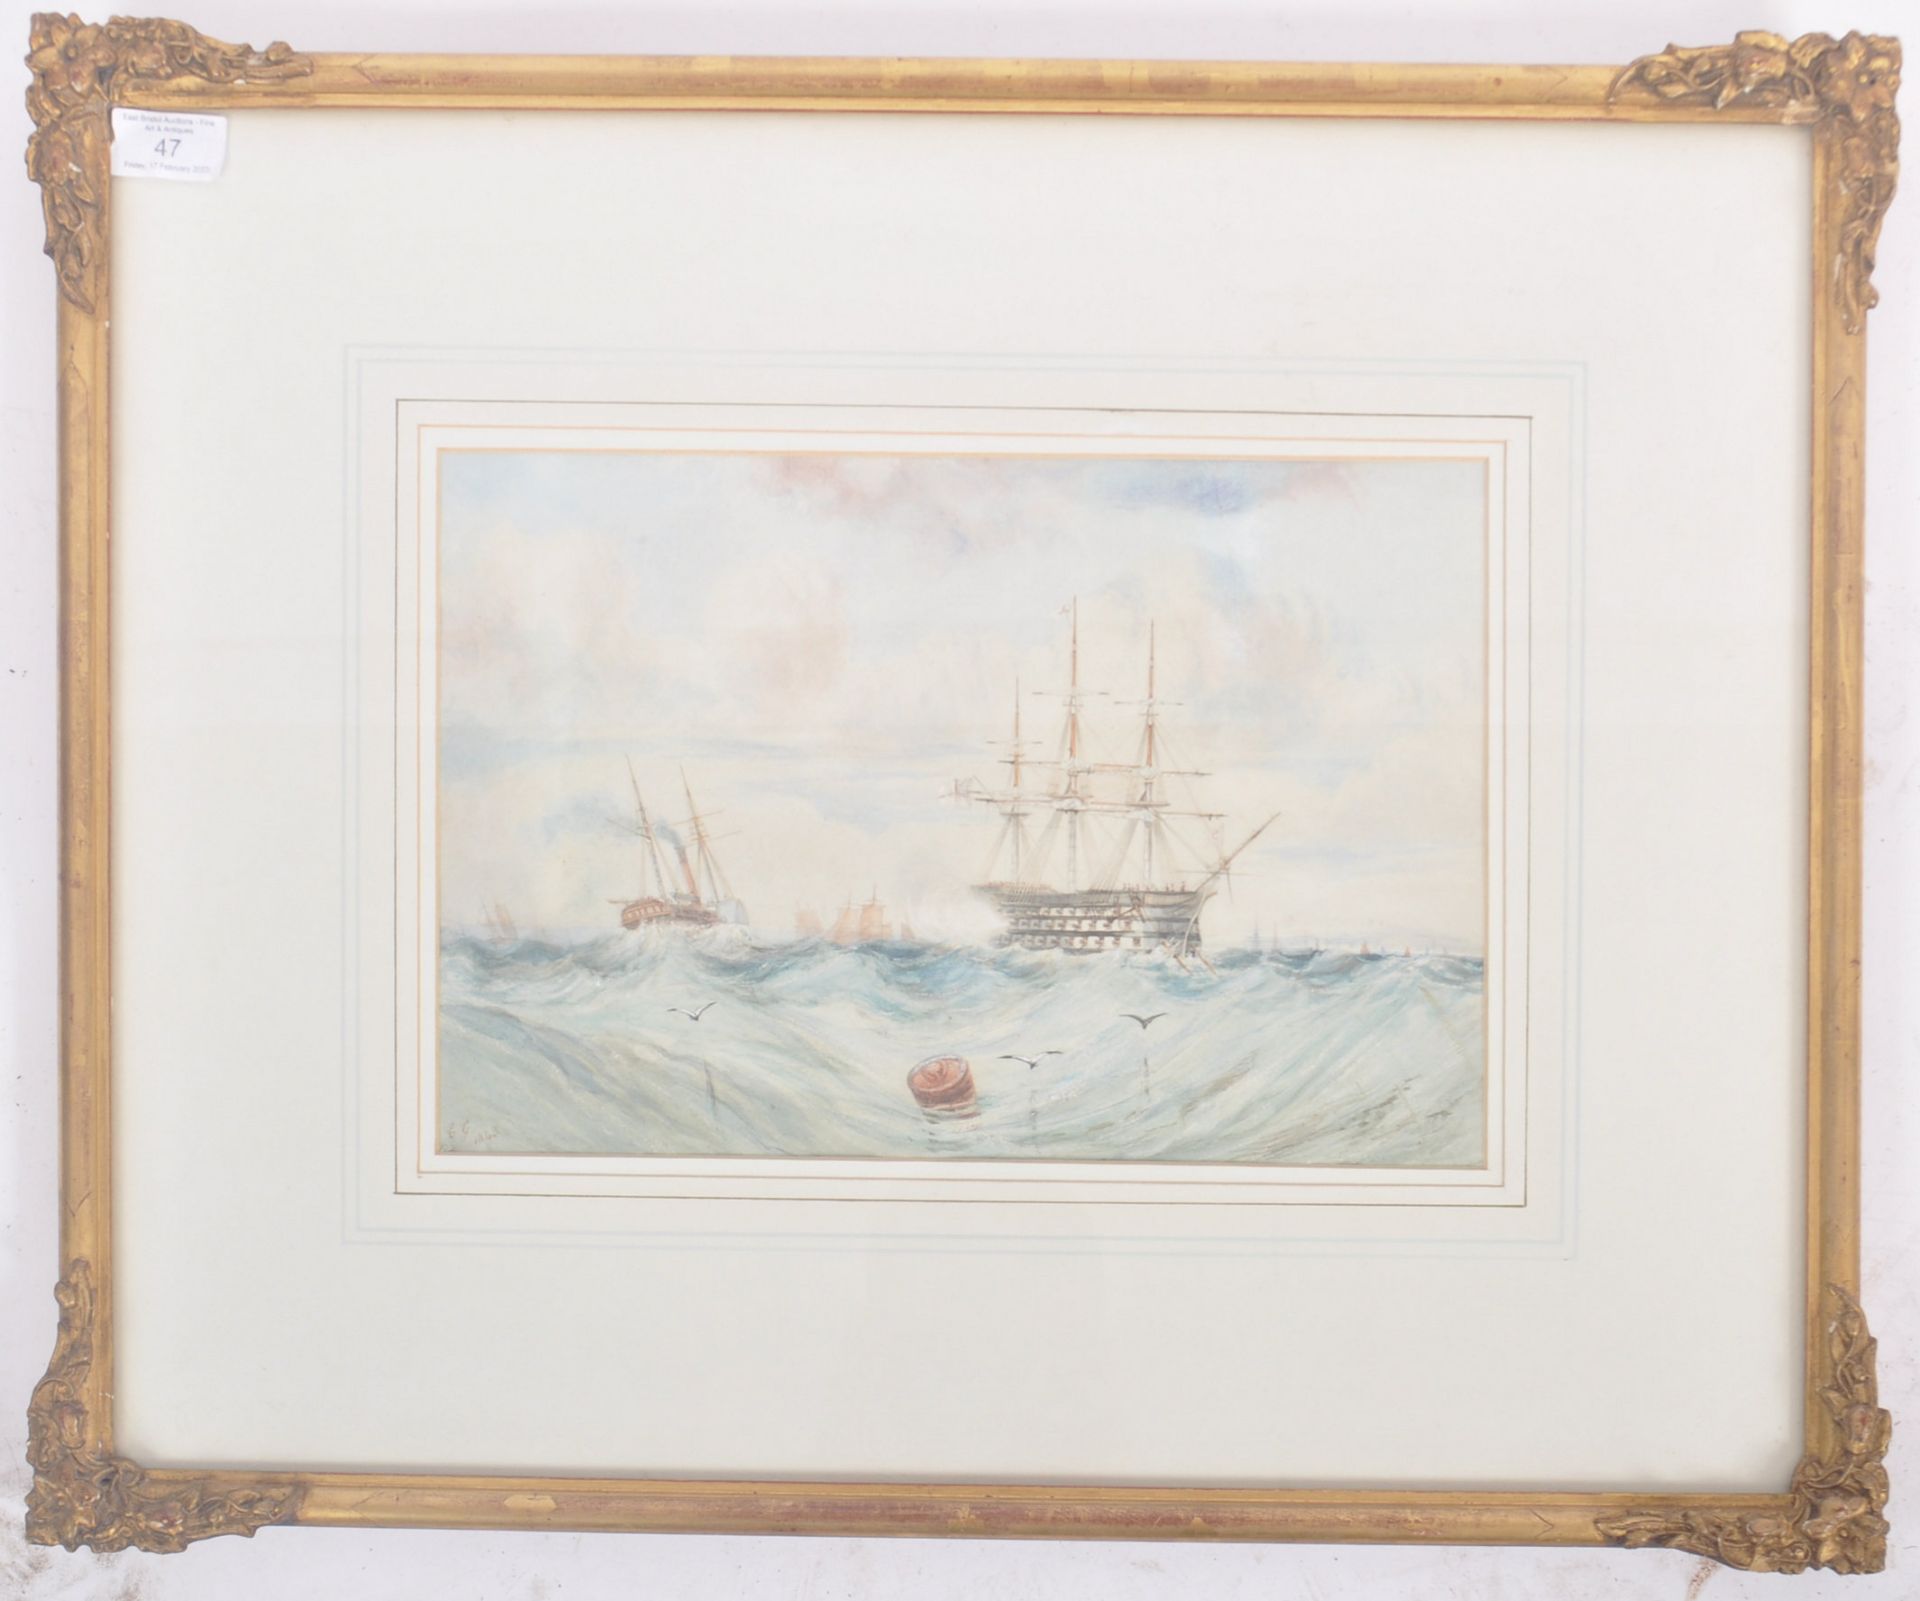 MID 19TH CENTURY VICTORIAN MARITIME WATERCOLOUR PAINTING - Image 4 of 7